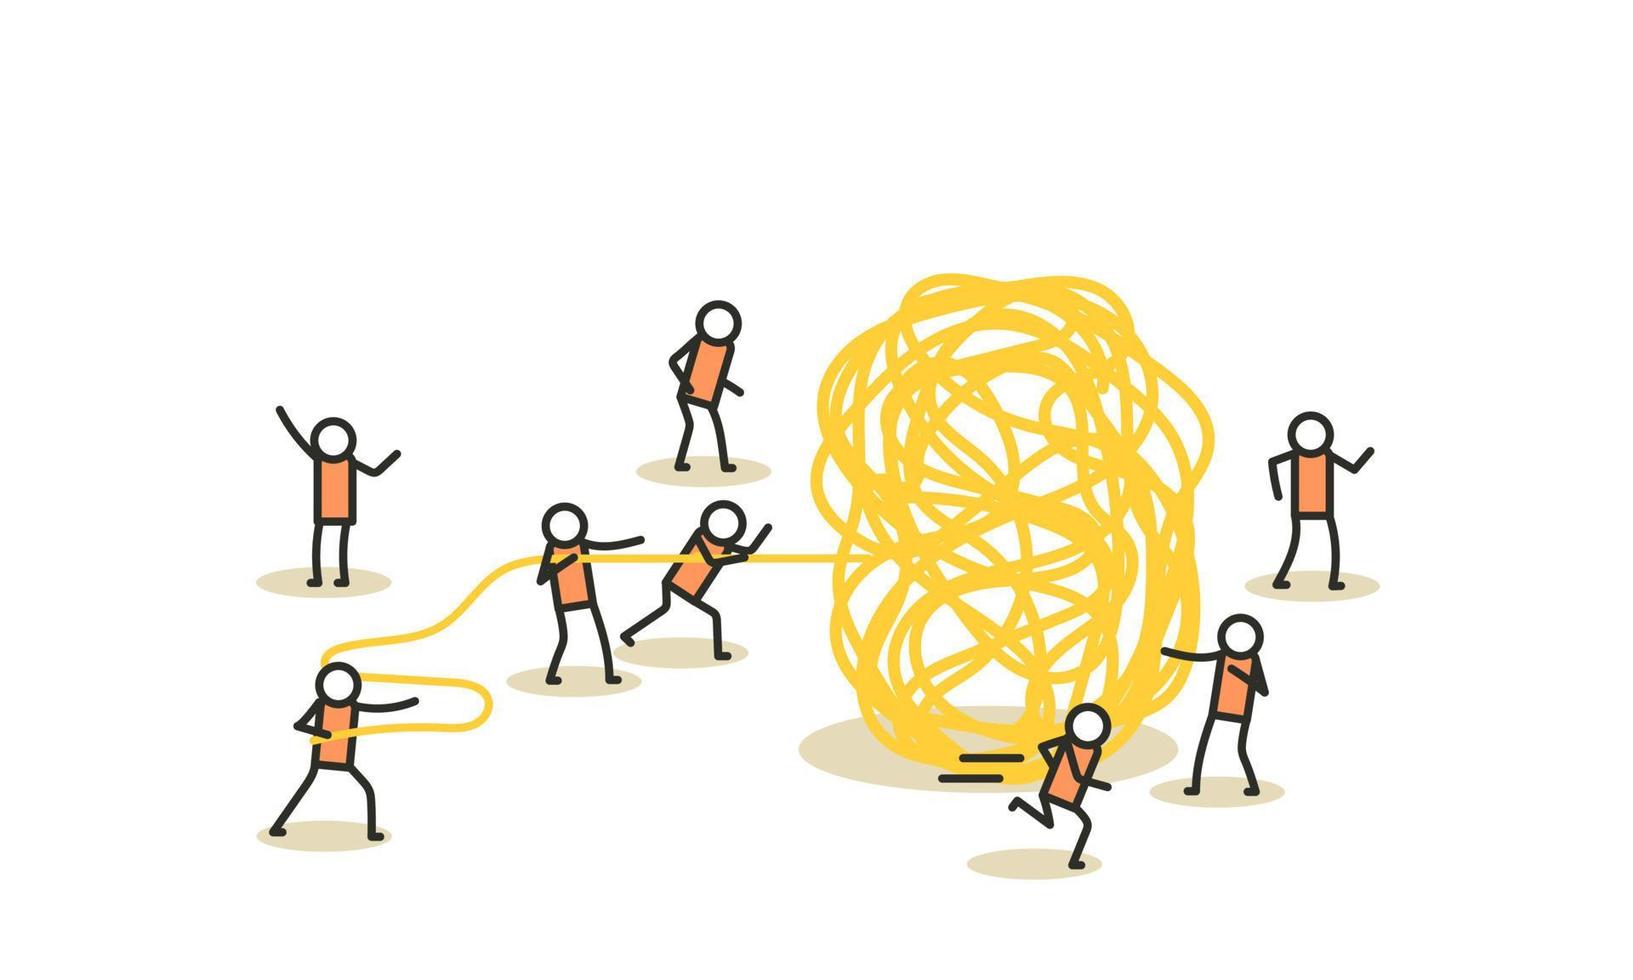 Business challenge vector achievement work progress. Tangle tangled conceptual abstract strategy teamwork people illustration. Solution clew ball career background. Searching motivation metaphor